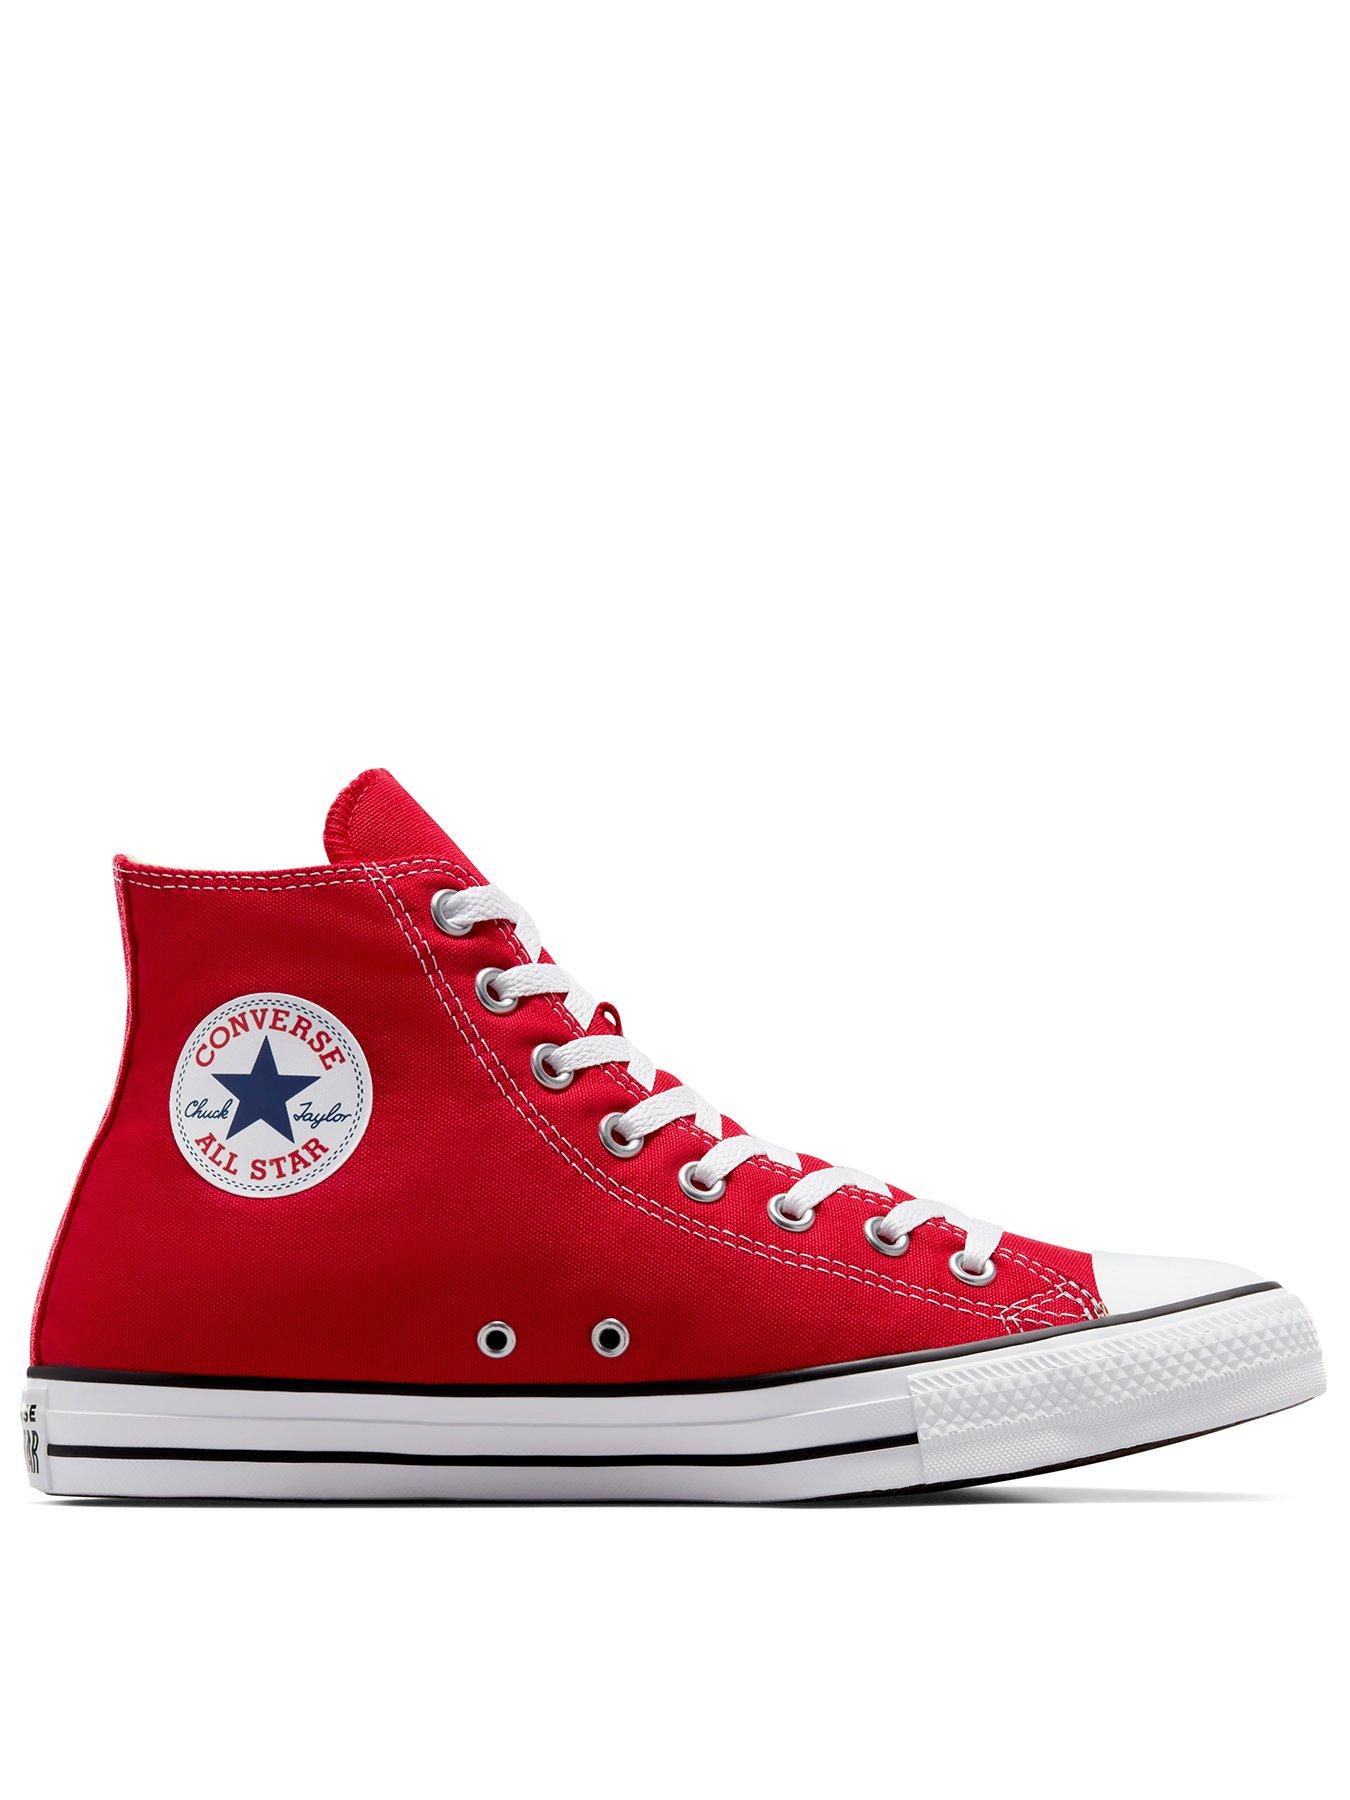 size 14 converse high tops